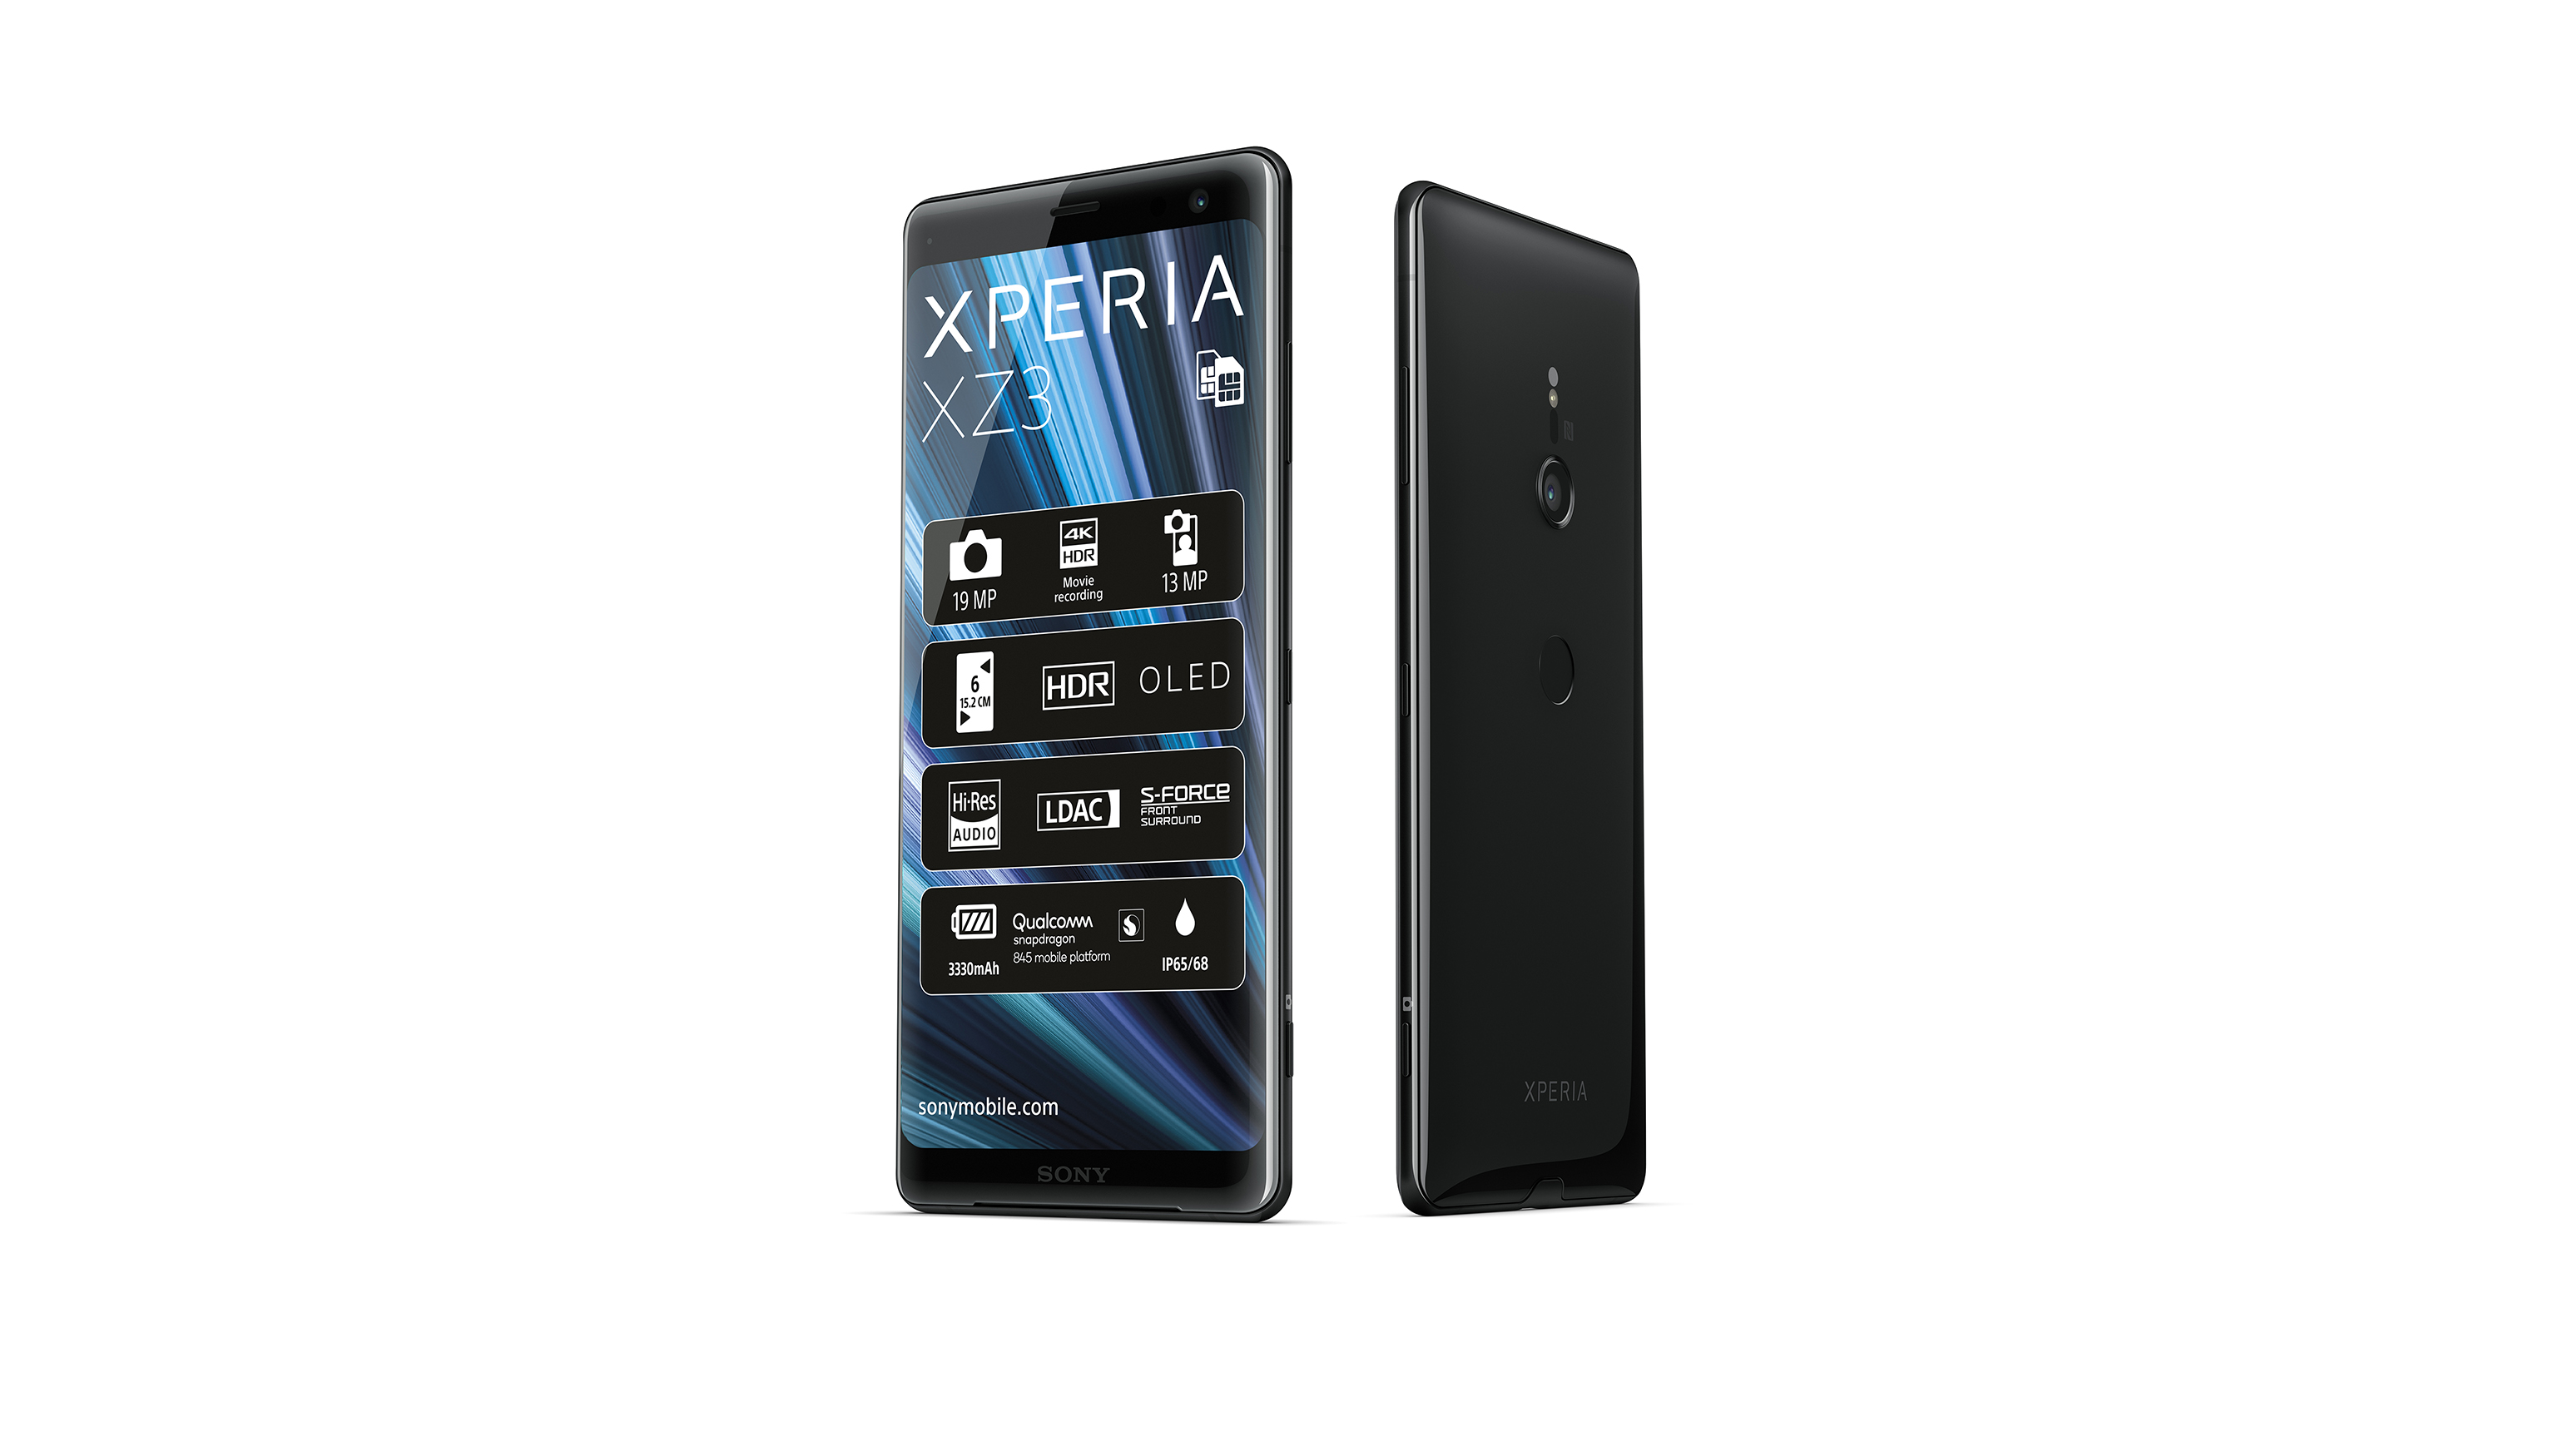 sony Xperia campaign by adentity, image of a phone back and front